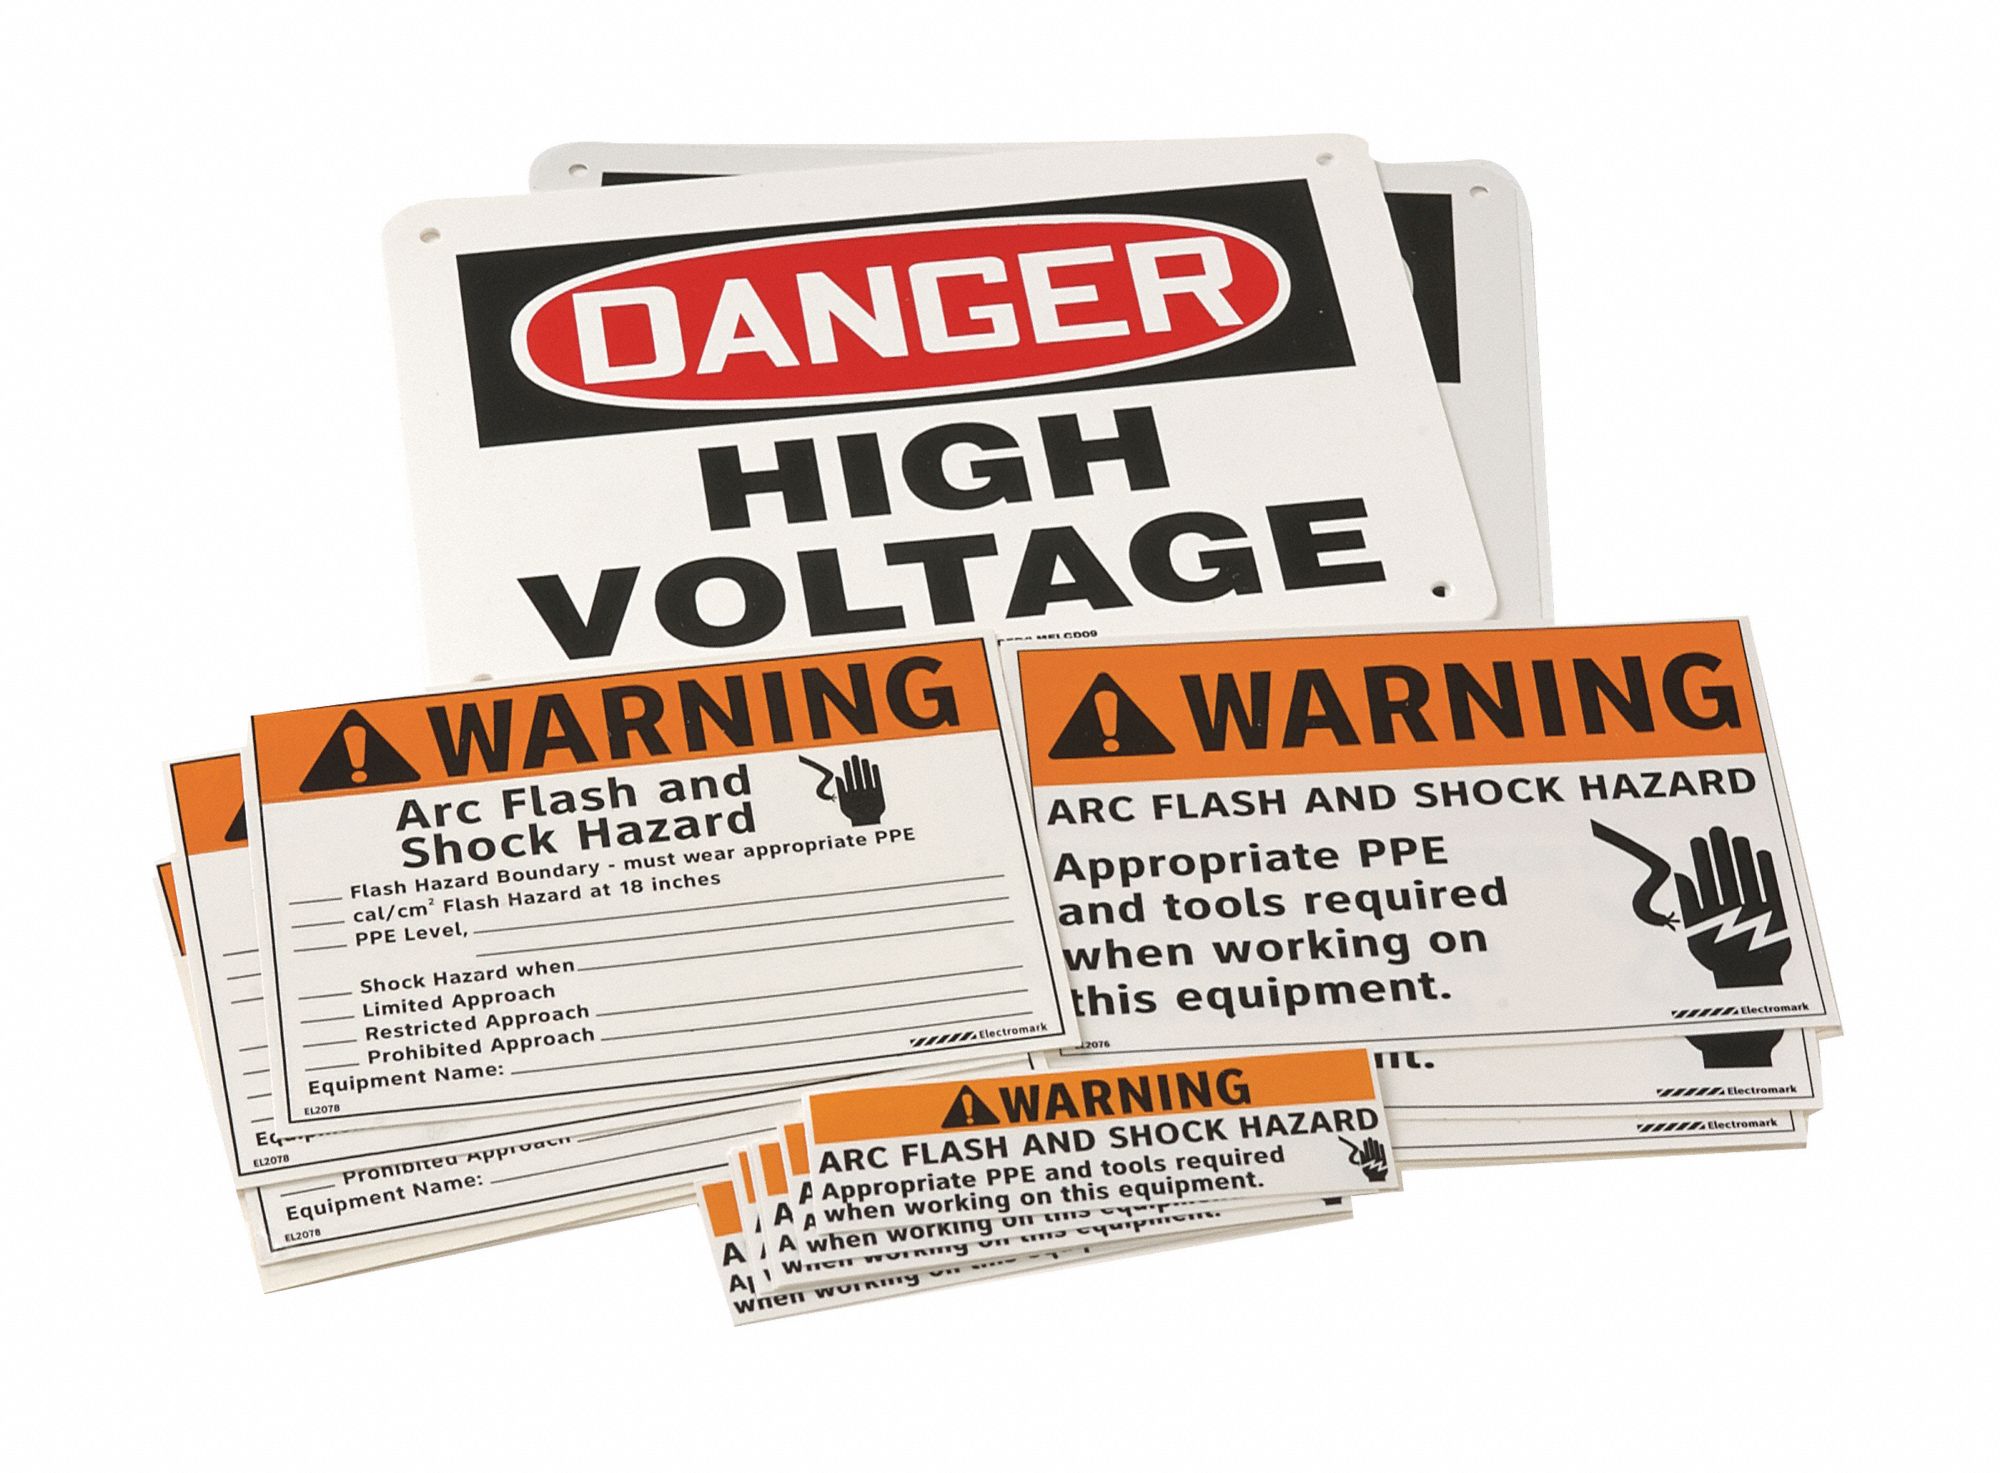 Adhesive Vinyl 7 x 10 Inches MELC113VS Accuform Danger High Voltage Safety Sign 